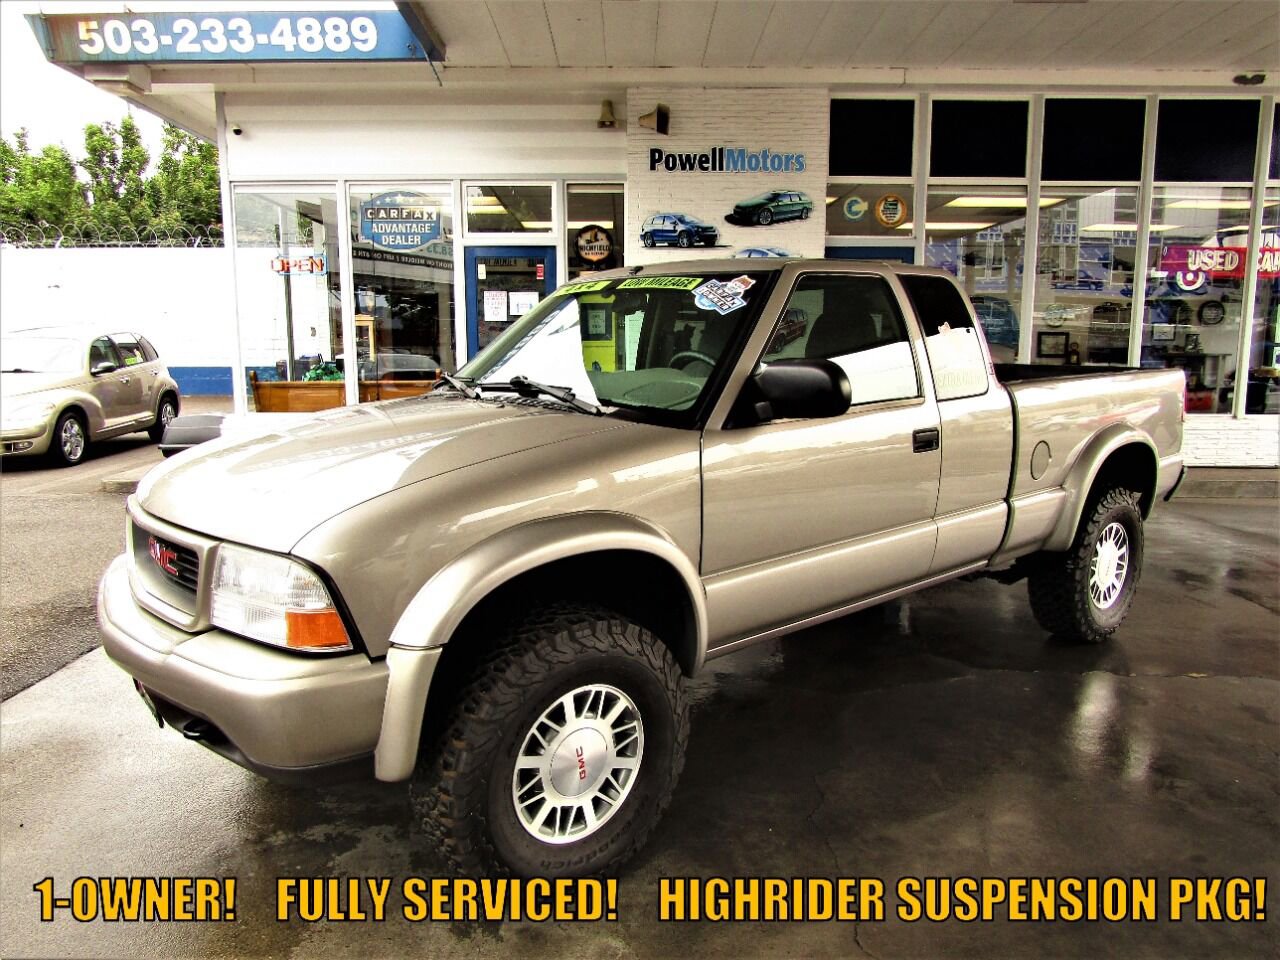 Used 2001 GMC Sonoma for Sale Right Now - Autotrader